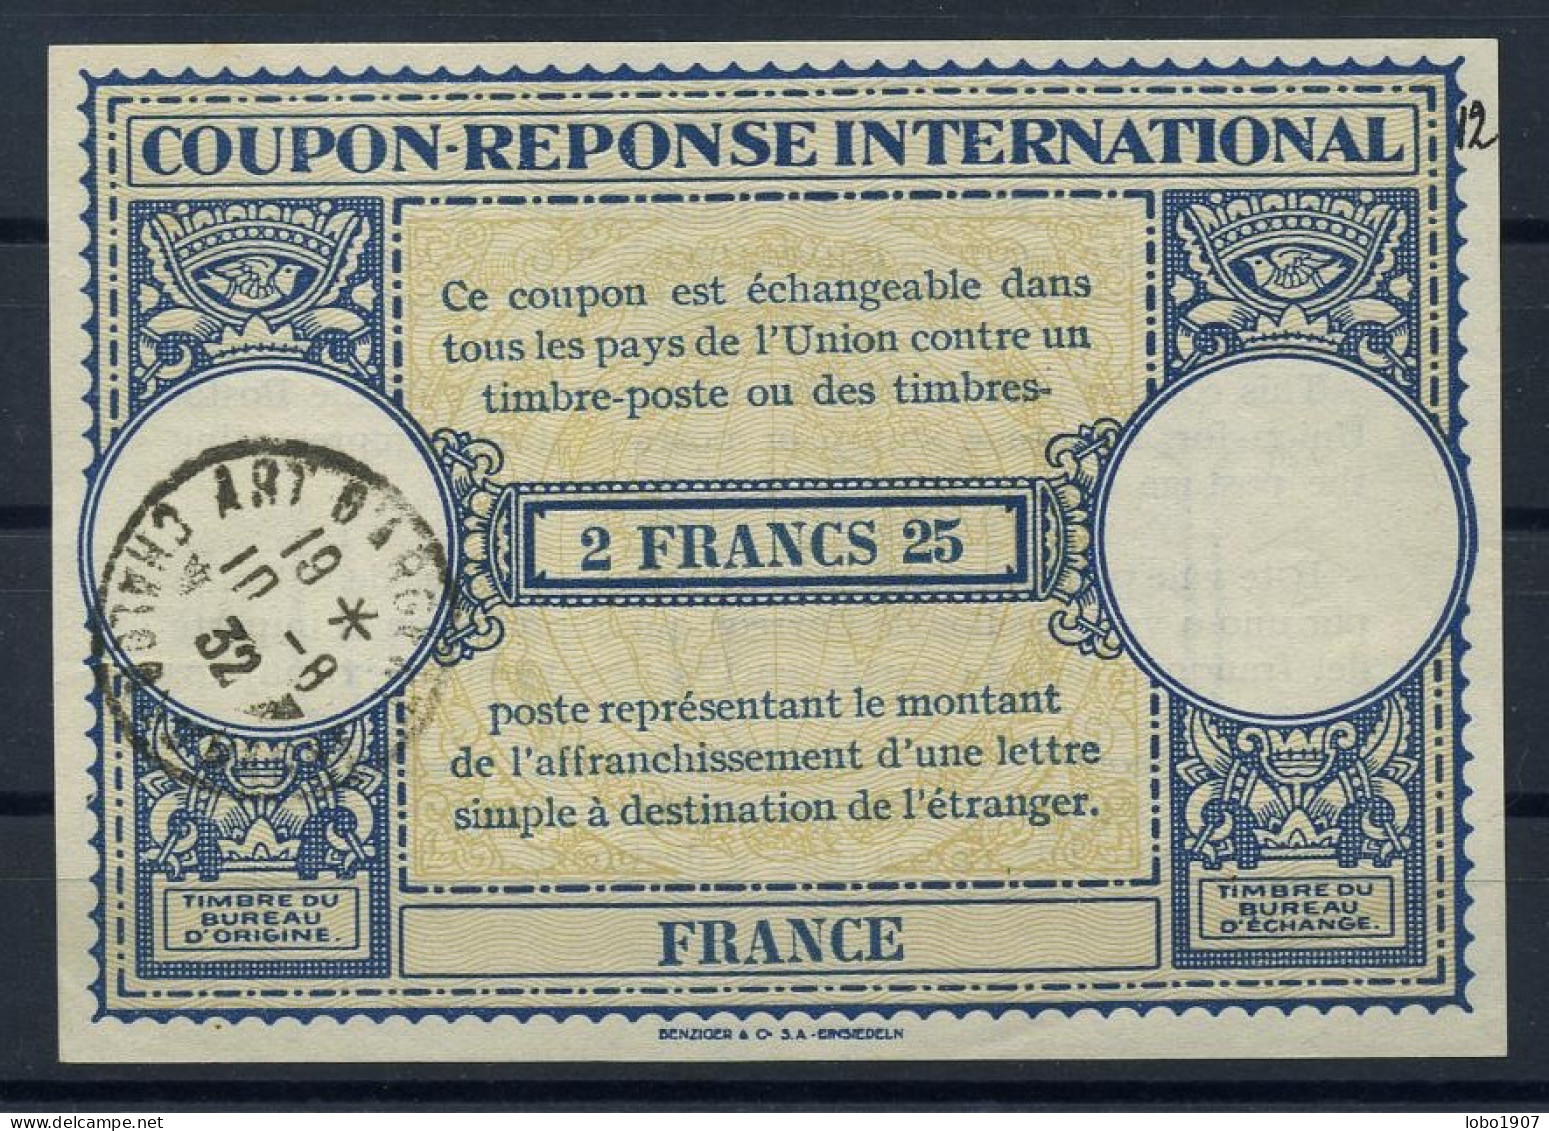 FRANCE  Lo9  2 FRANCS 25  International Reply Coupon Reponse Antwortschein IRC IAS Cupon Respuesta O CHALON 10.08.32 - Coupons-réponse